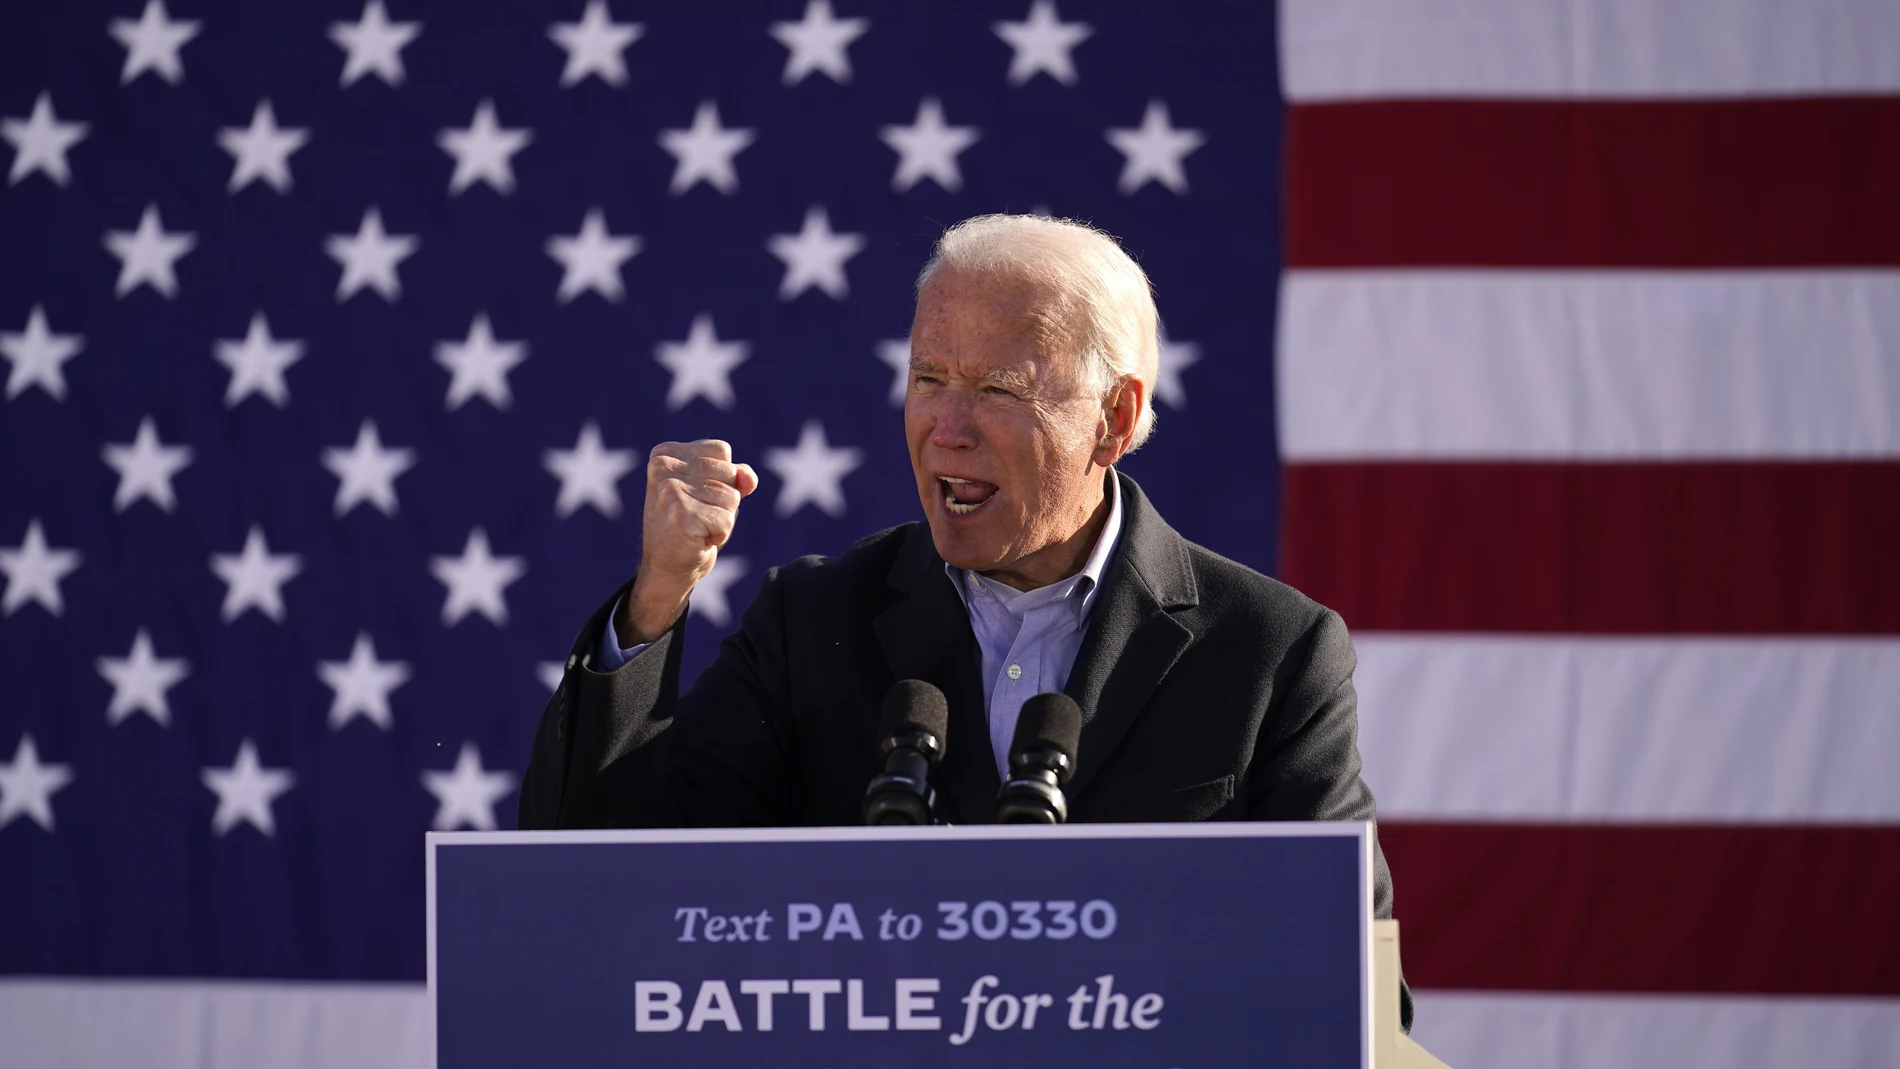 Democratic presidential candidate former Vice President Joe Biden speaks at a rally at Community College of Beaver County, Monday, Nov. 2, 2020, in Monaca, Pa. (AP Photo/Andrew Harnik)